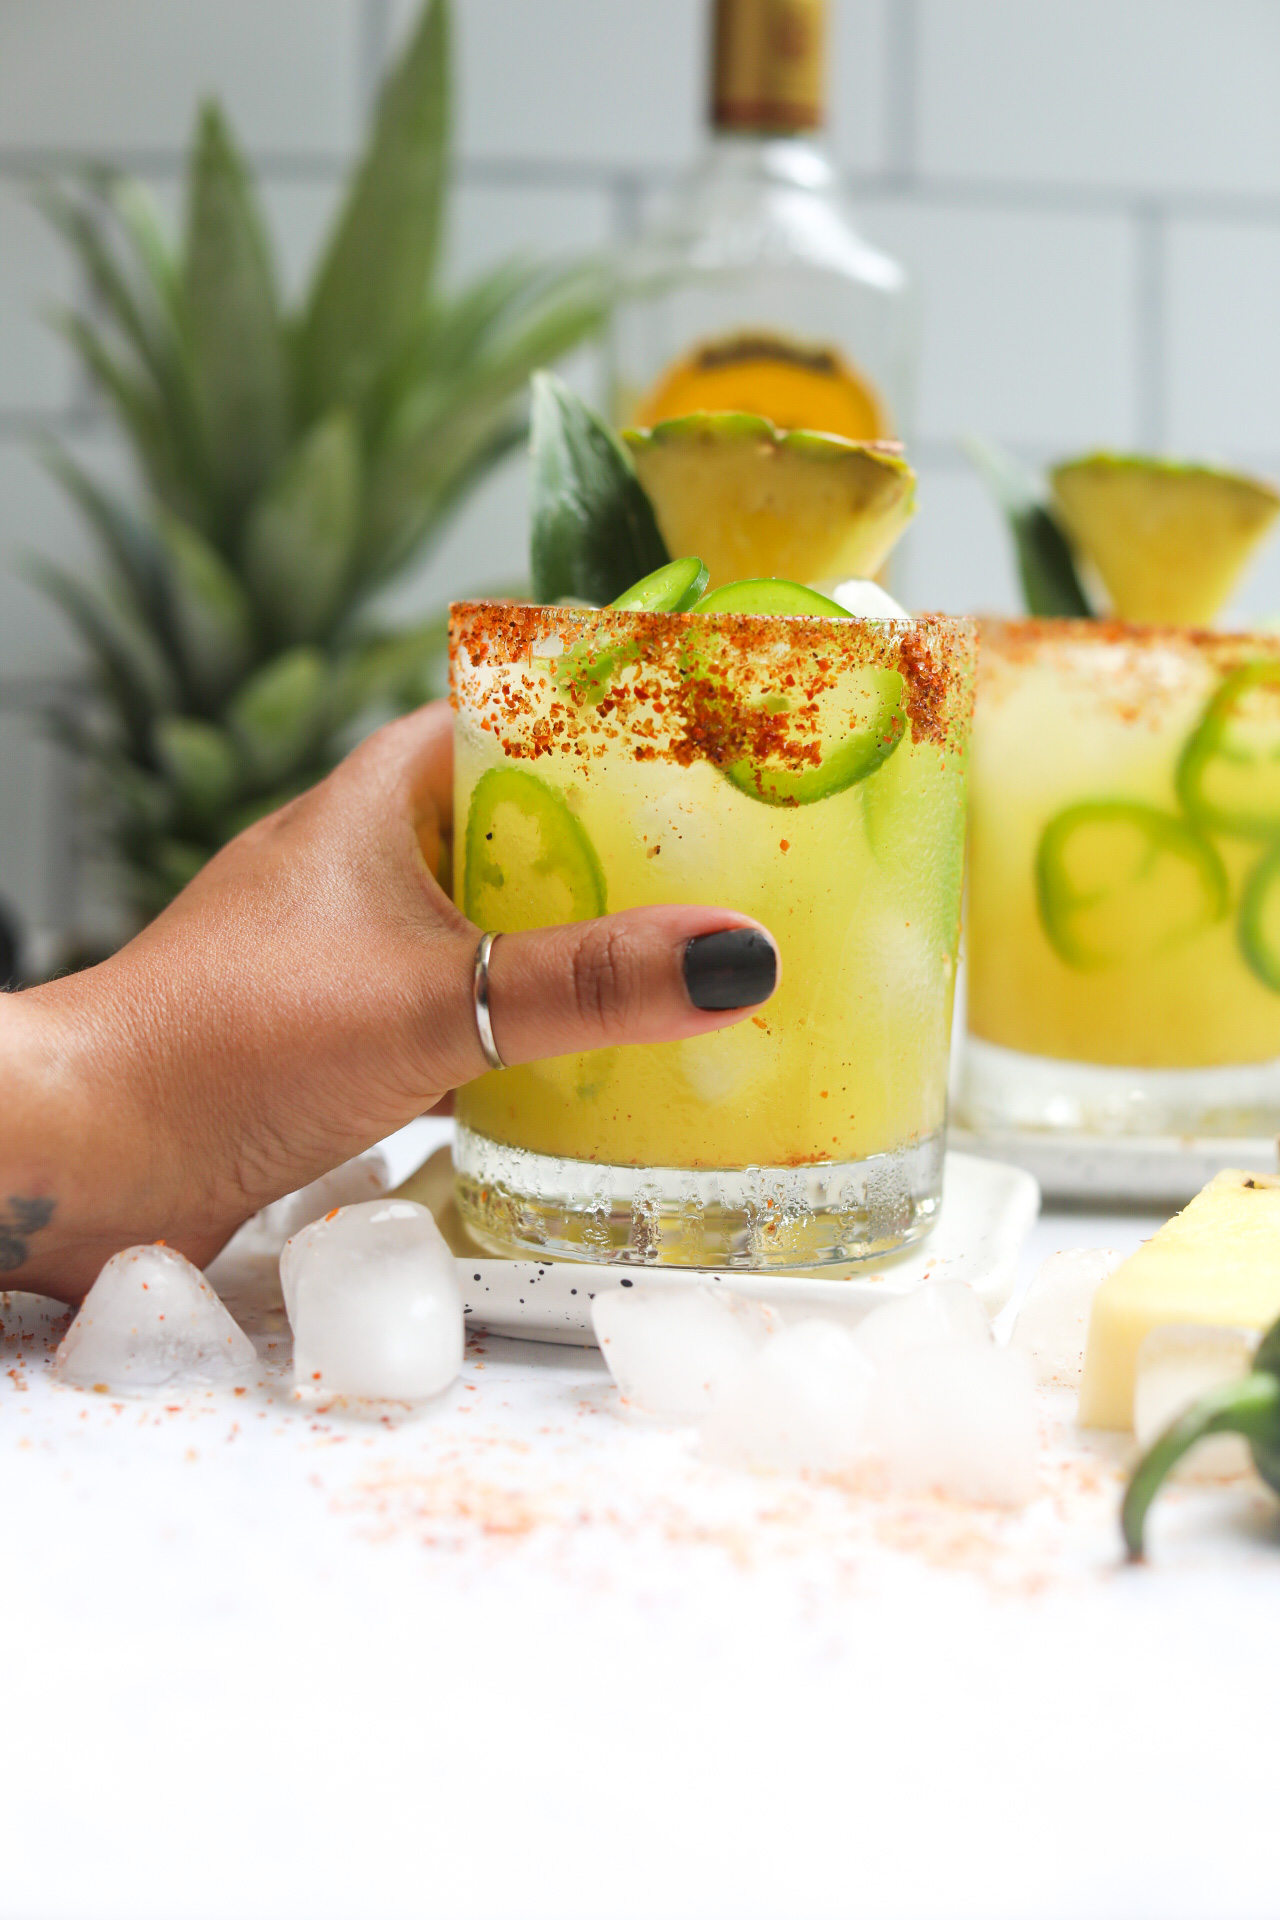 Margarita in a short glass dressed with sliced jalapenos, pineapple slice and pineapple leaf. Tequila bottle is behind the cocktail as well as the top of a fresh pineapple for styling purposes. A left hand is holding the cocktail glass with thumb showing black fingernail polish and a gold ring around the thumb.